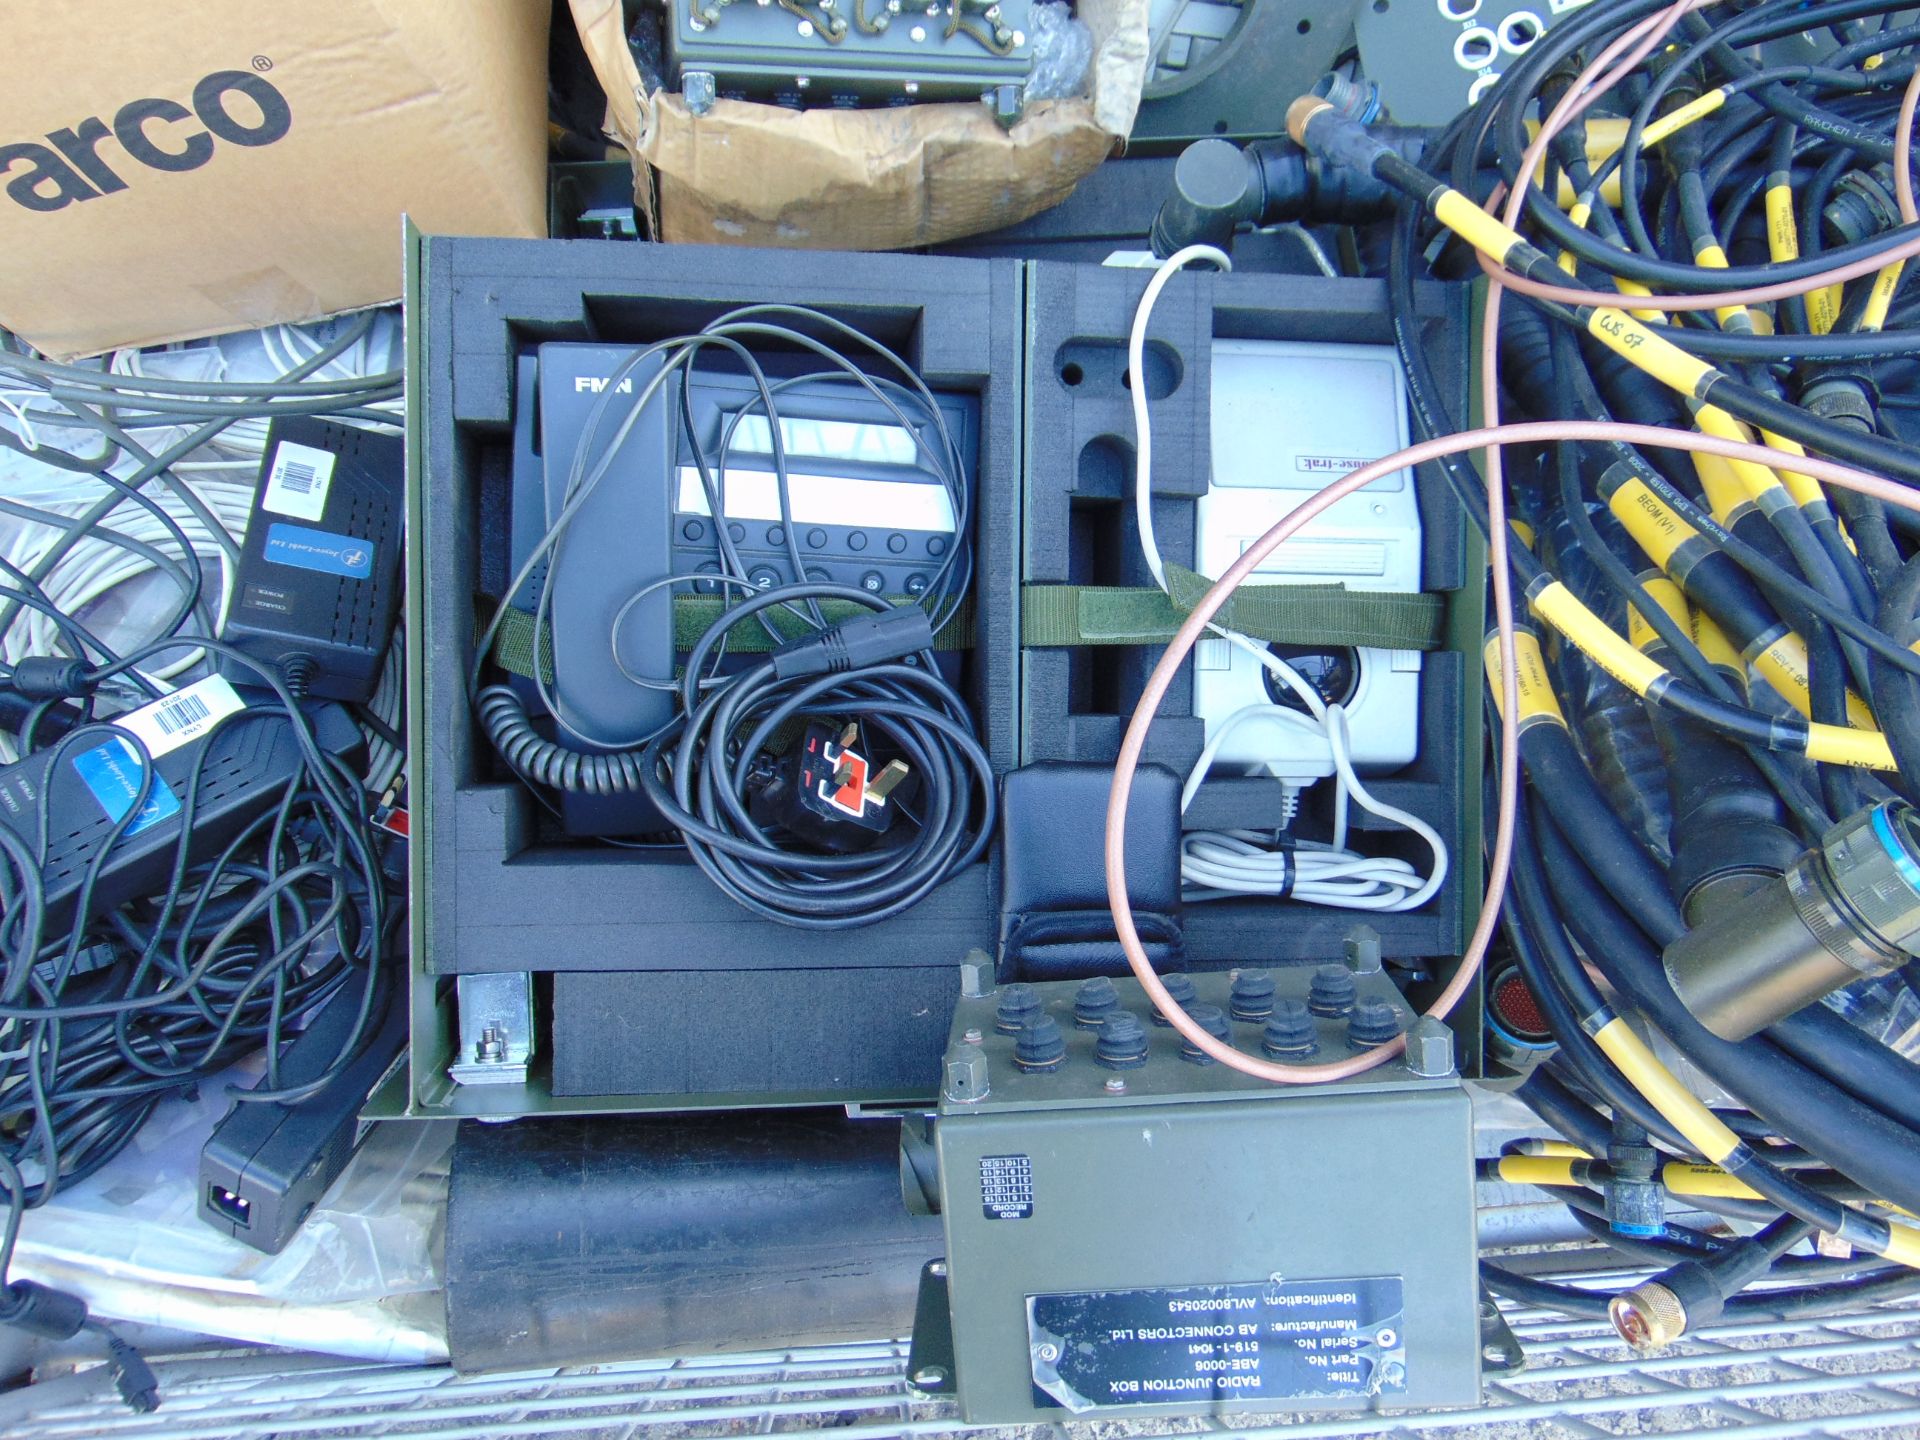 1 x Stillage of Comms Equipment and Spares, Cables etc - Image 5 of 7